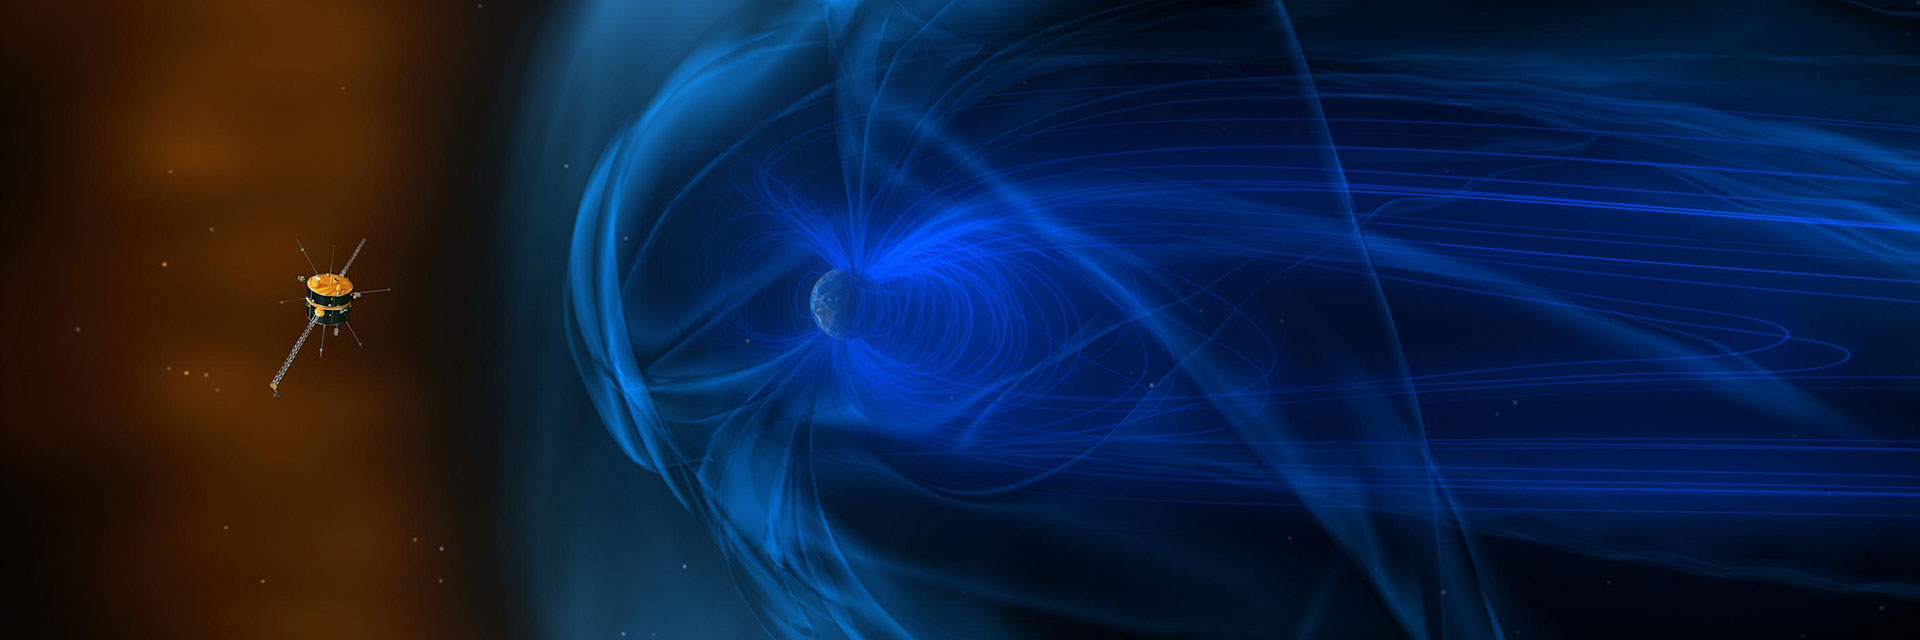 Blue swirls show Earths magnetic field with a spacecraft orbiting nearby in the orange flow of the Sun